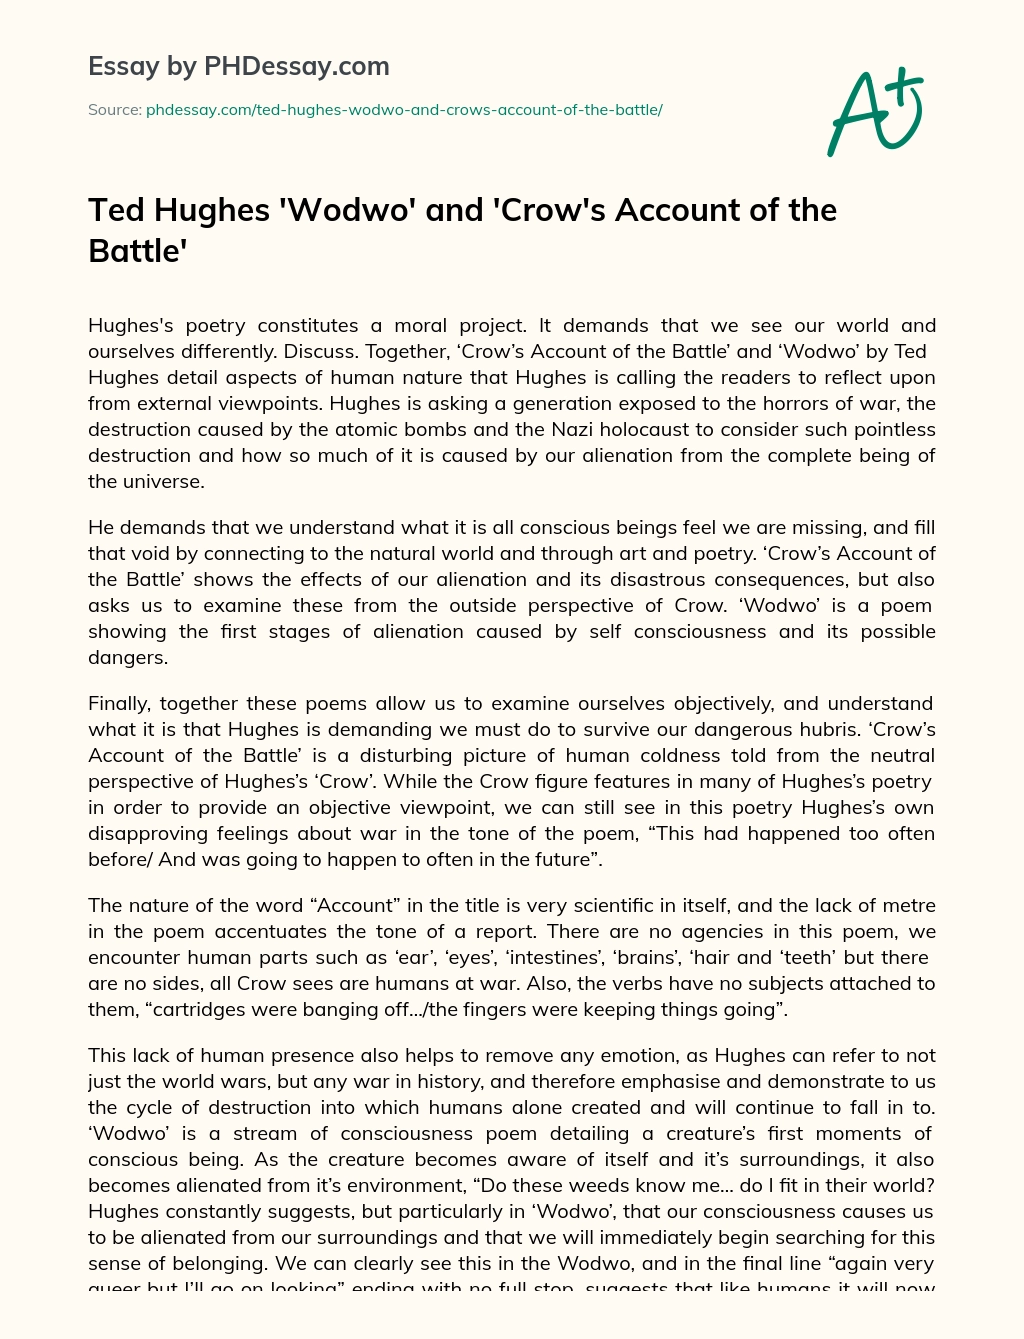 Ted Hughes ‘Wodwo’ and ‘Crow’s Account of the Battle’ essay